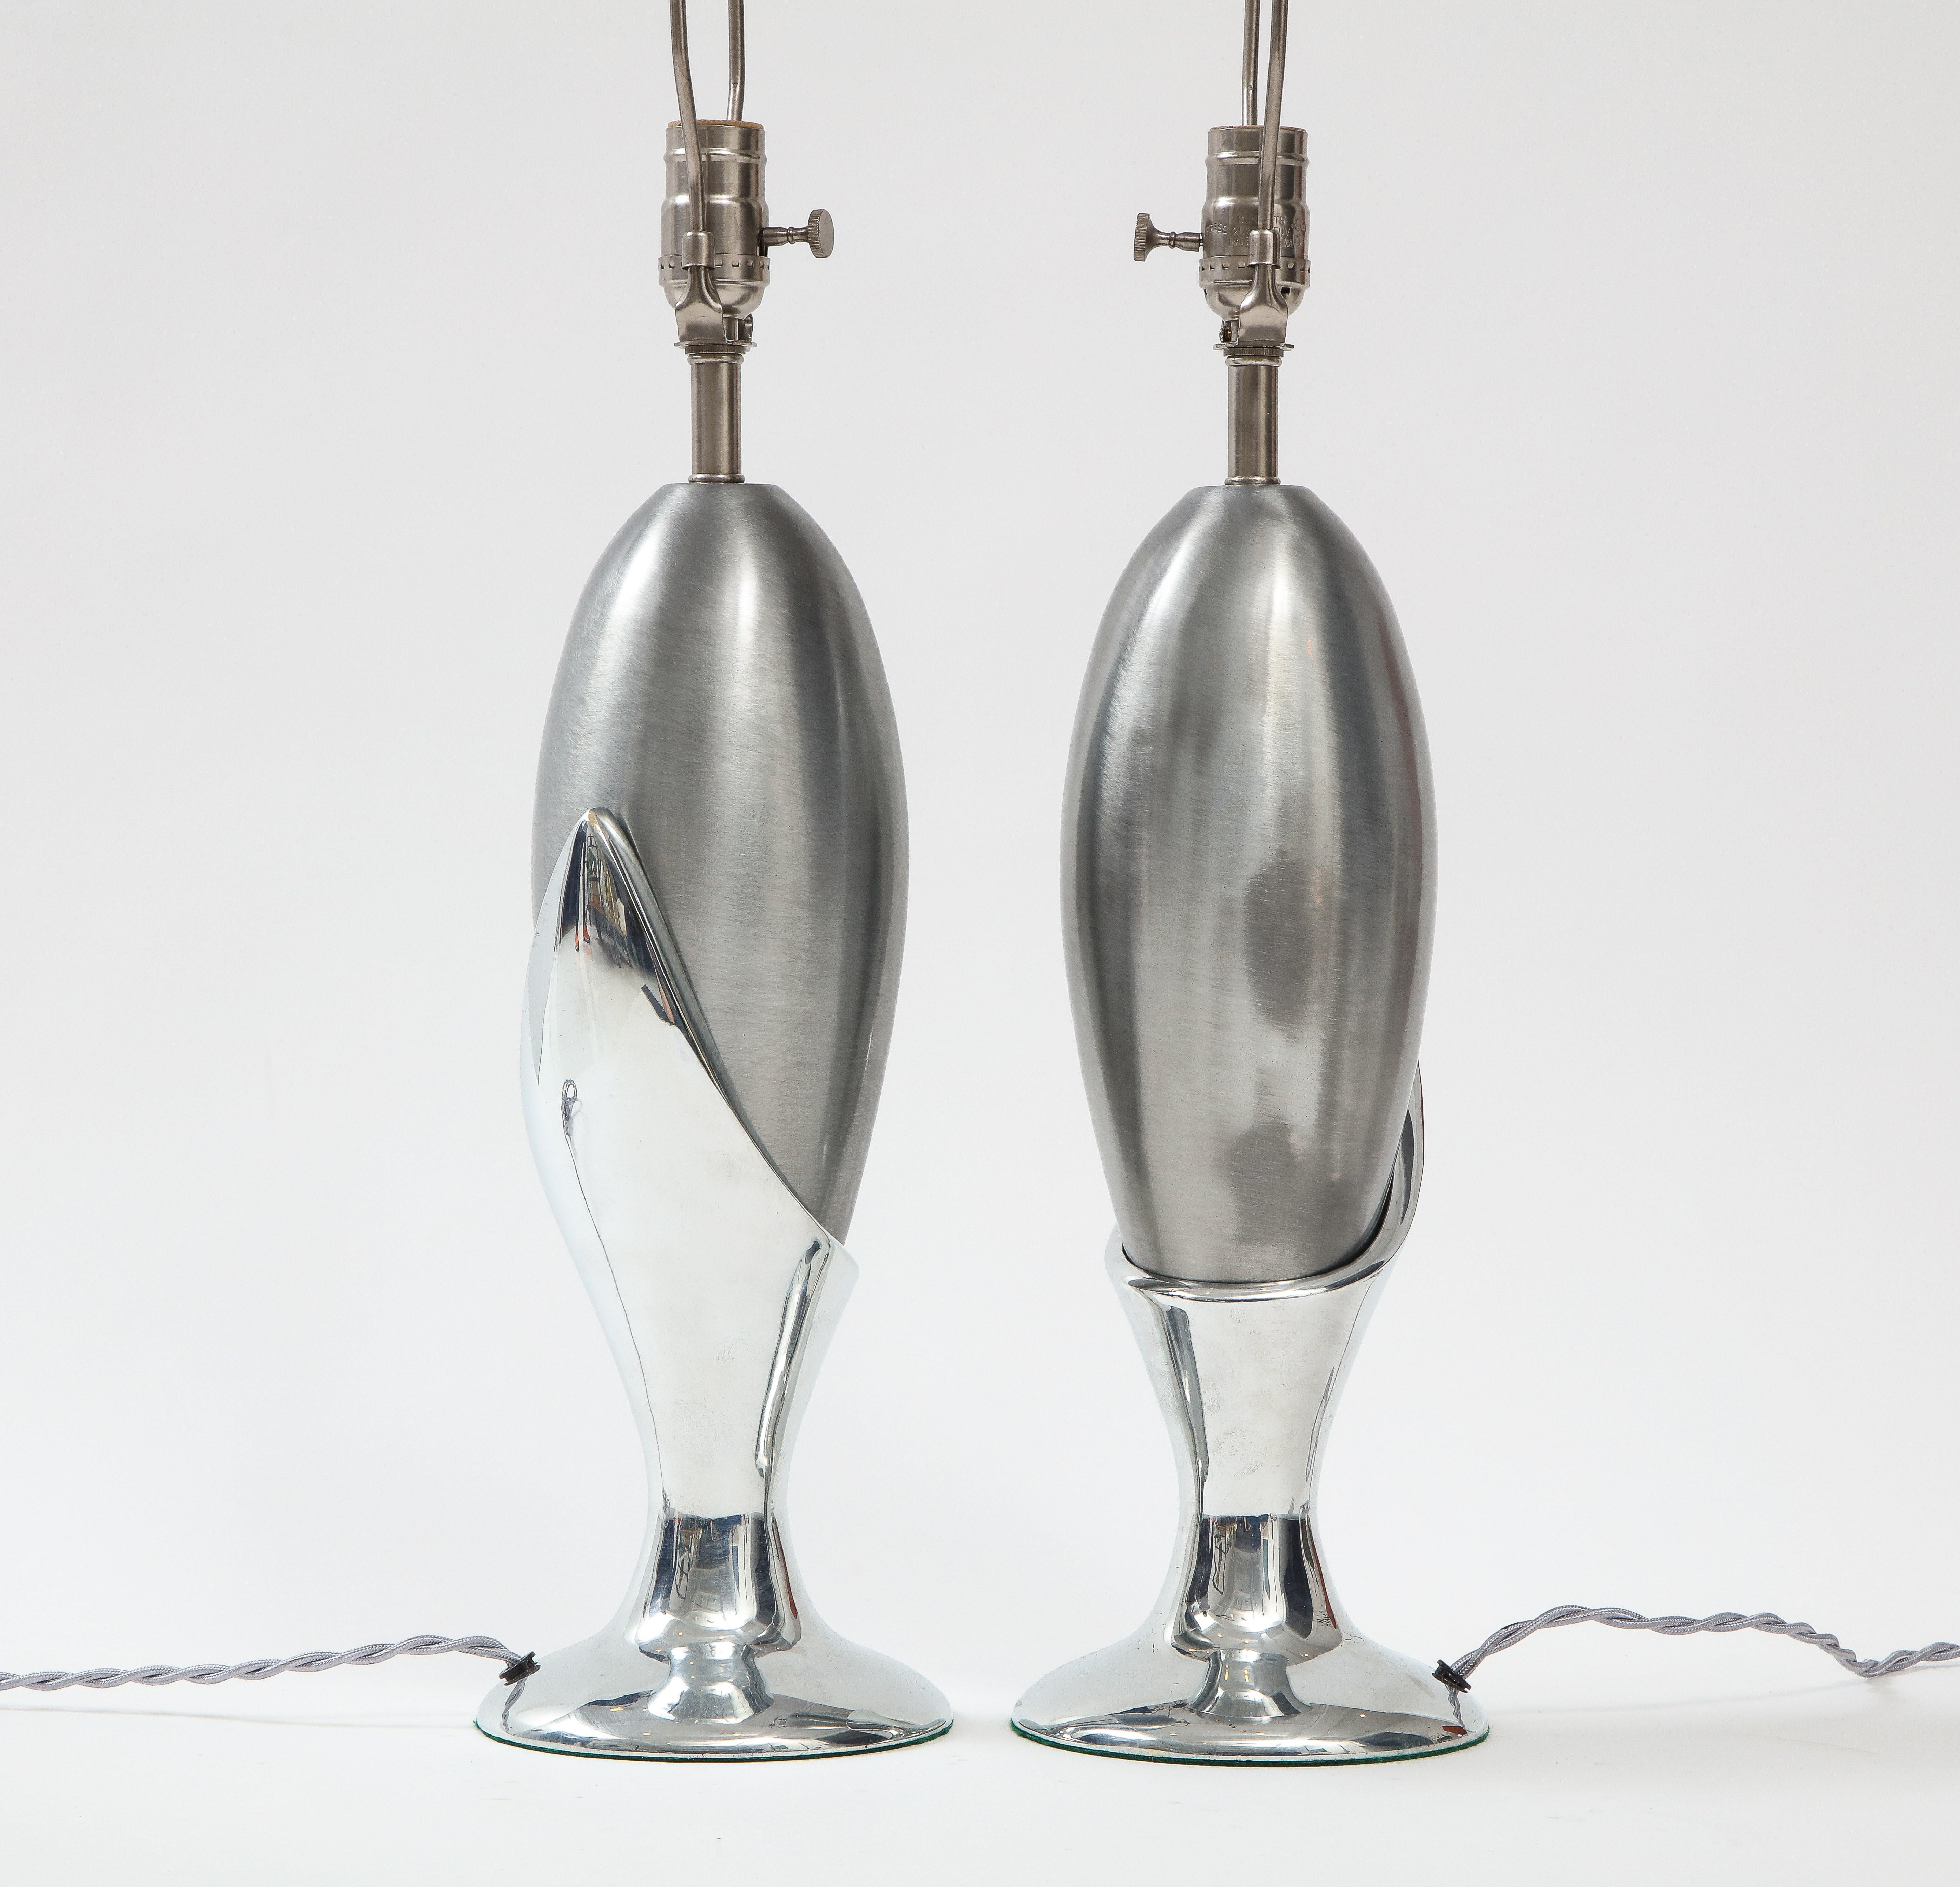 Pair of Modernist stylized flower/tree bud lamps featuring matte finished nickel buds resting in polished nickel base. Rewired with silver twist cord, 100W max bulbs. A rare, seldom seen design.